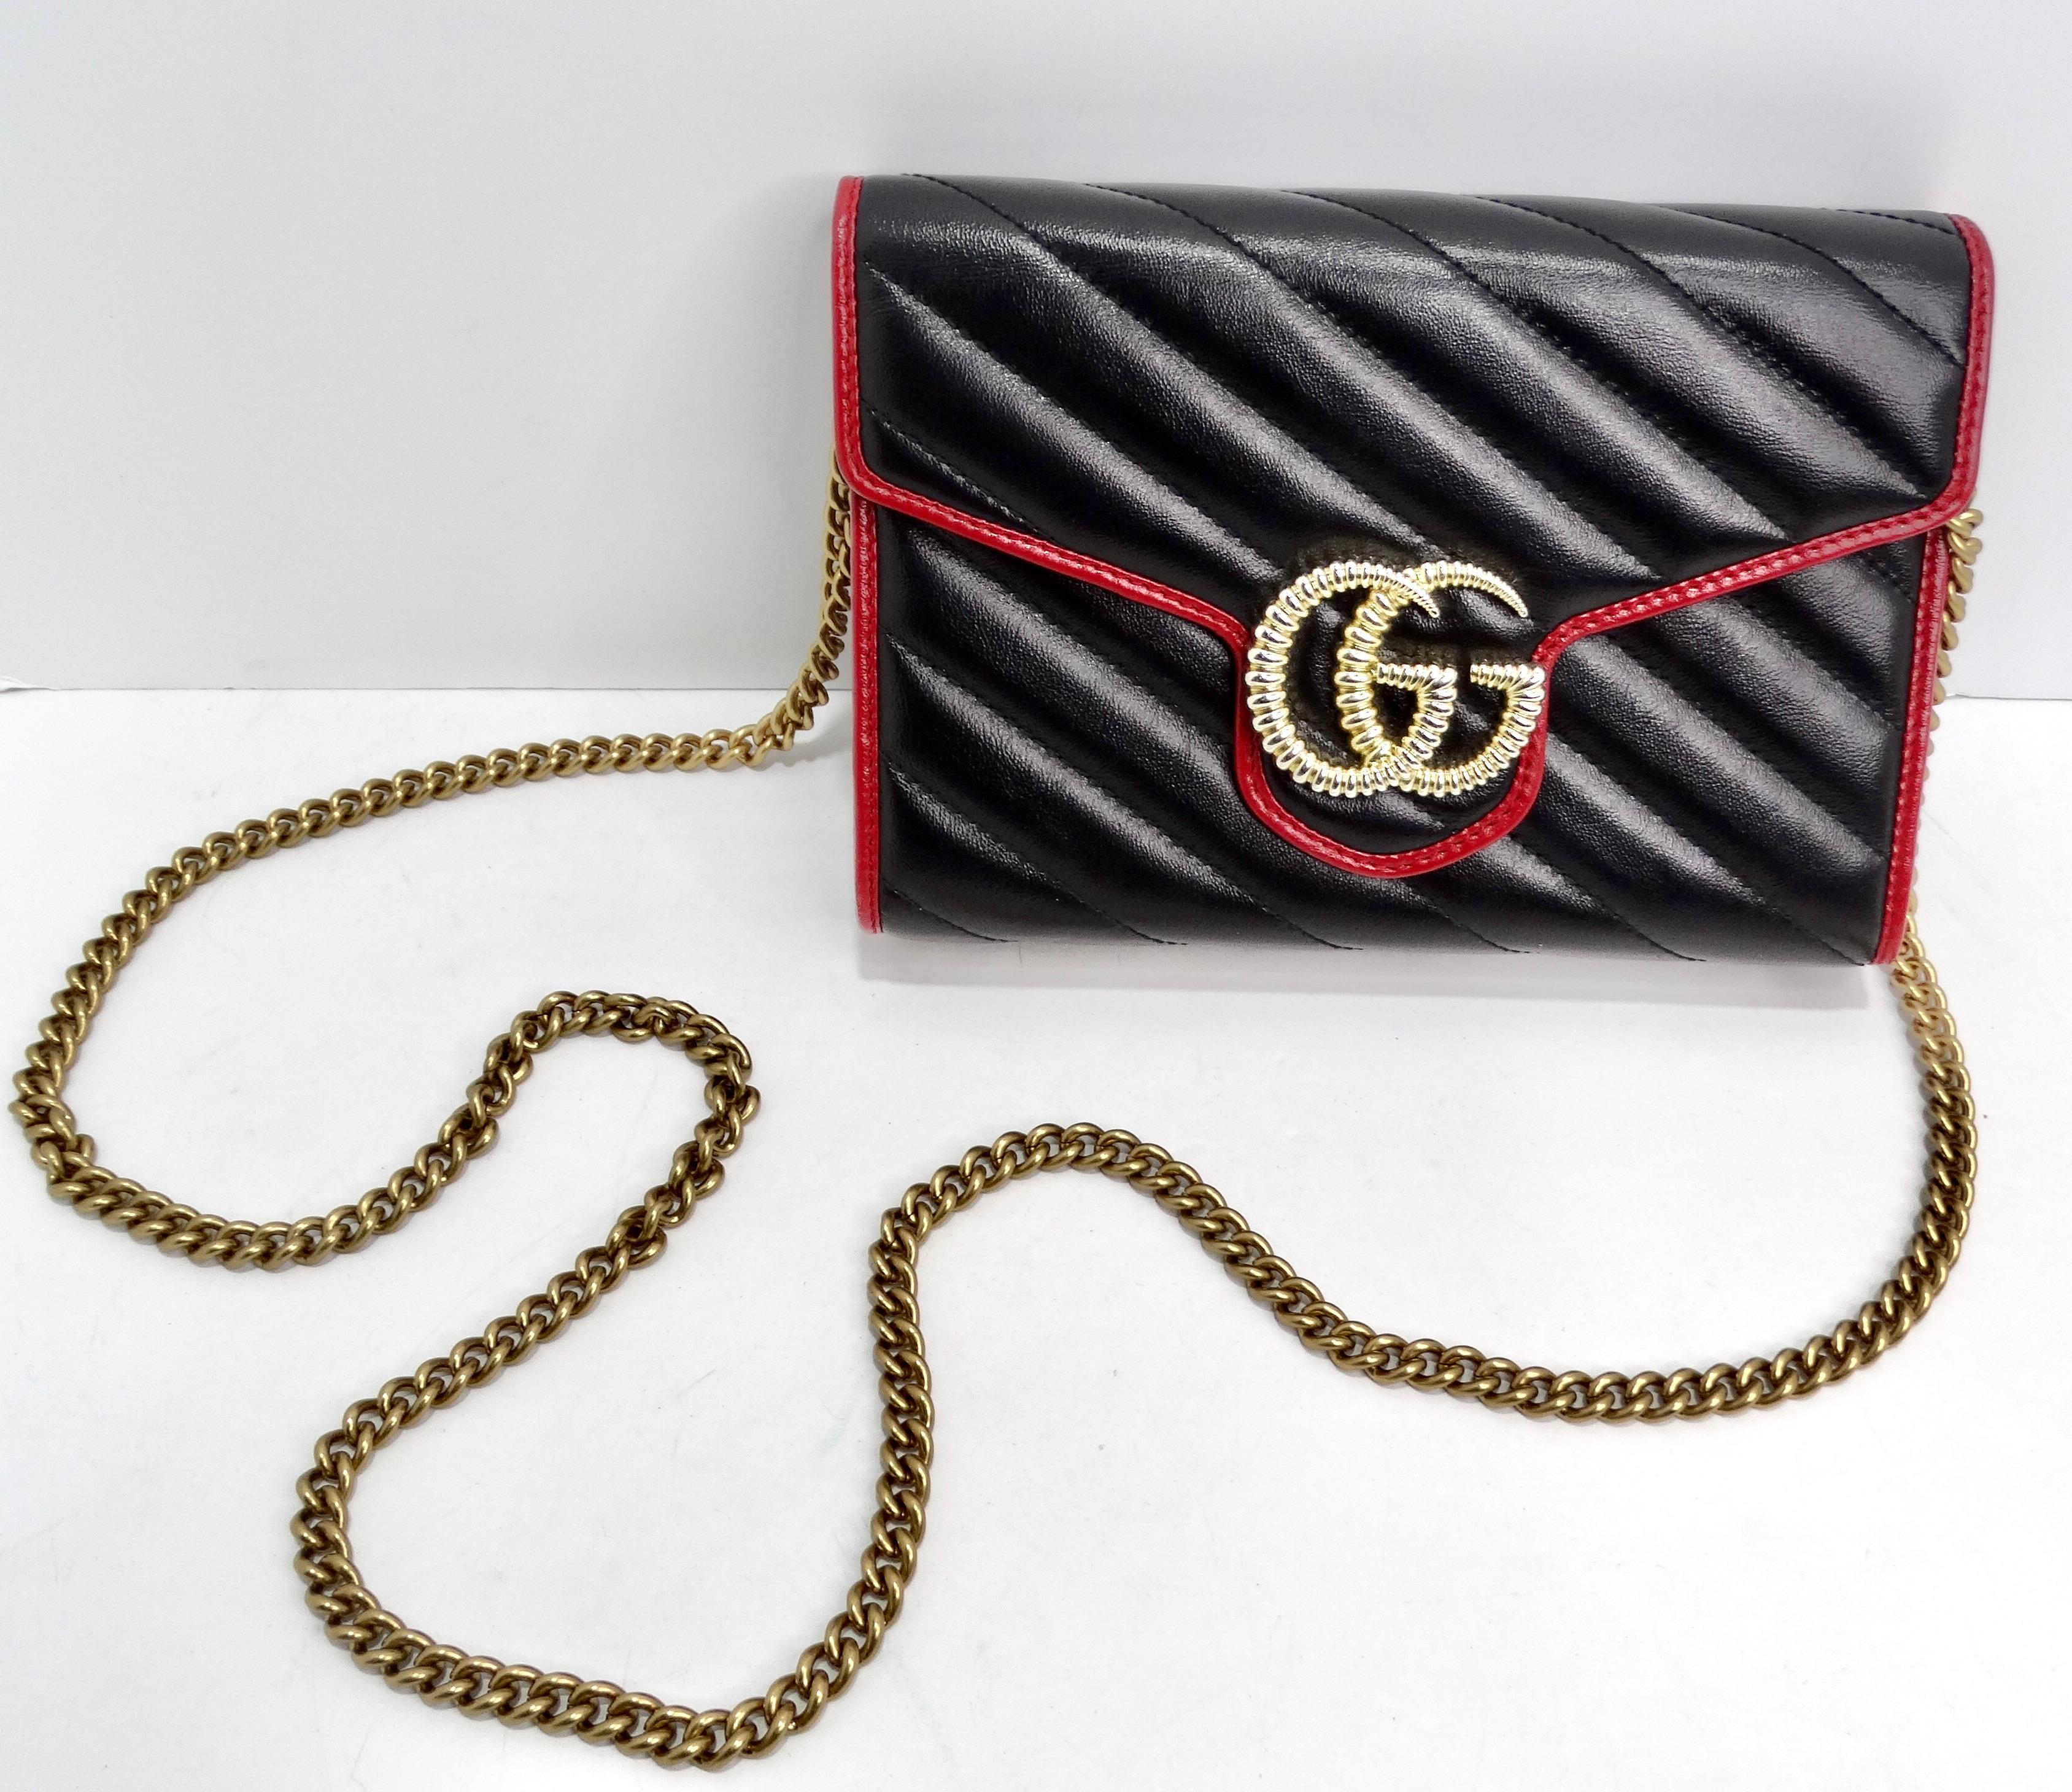 Introducing the Gucci GG Marmont Torchon Wallet on Chain—an exquisite accessory that seamlessly blends luxury with iconic Gucci style. This handbag isn't just an accessory; it's a wearable masterpiece crafted with meticulous attention to detail.